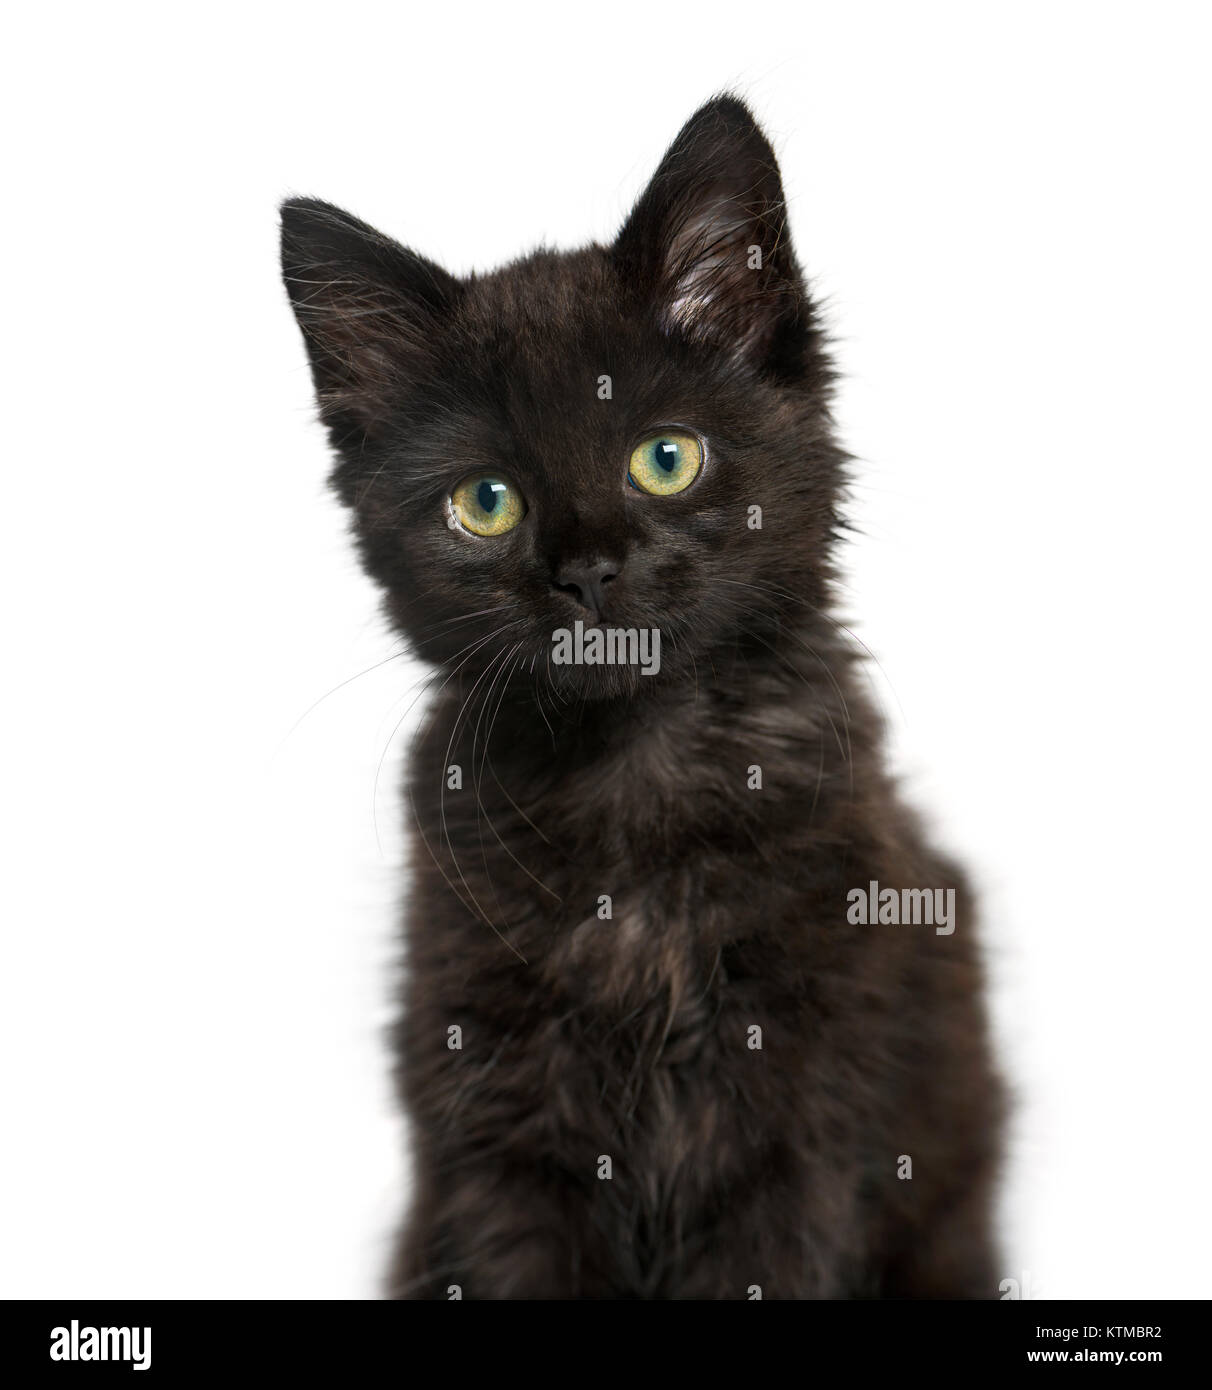 portrait of a Black cat kitten, isolated on white Stock Photo